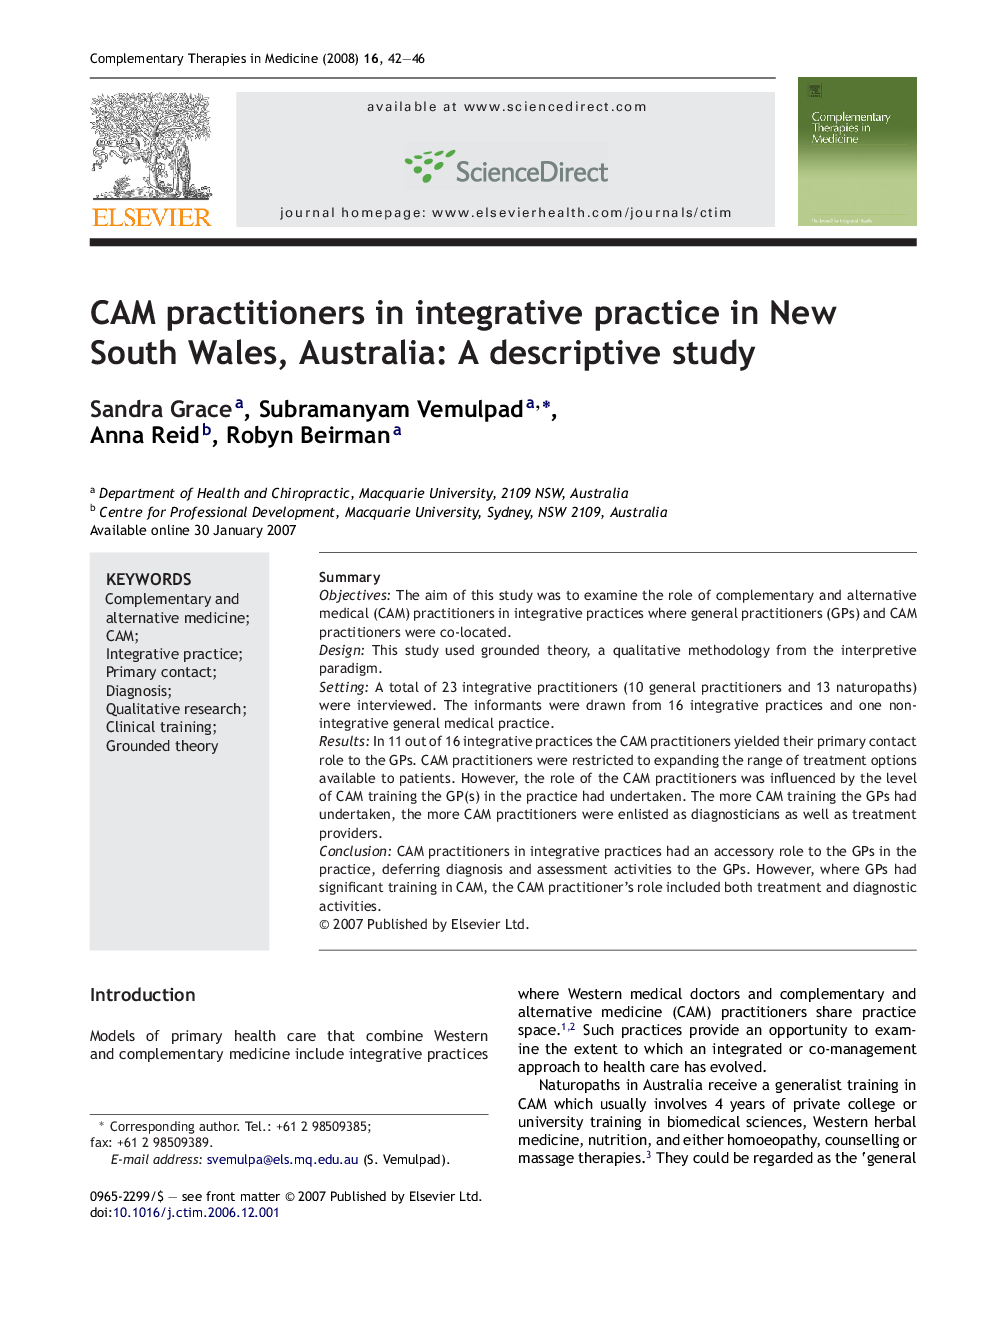 CAM practitioners in integrative practice in New South Wales, Australia: A descriptive study